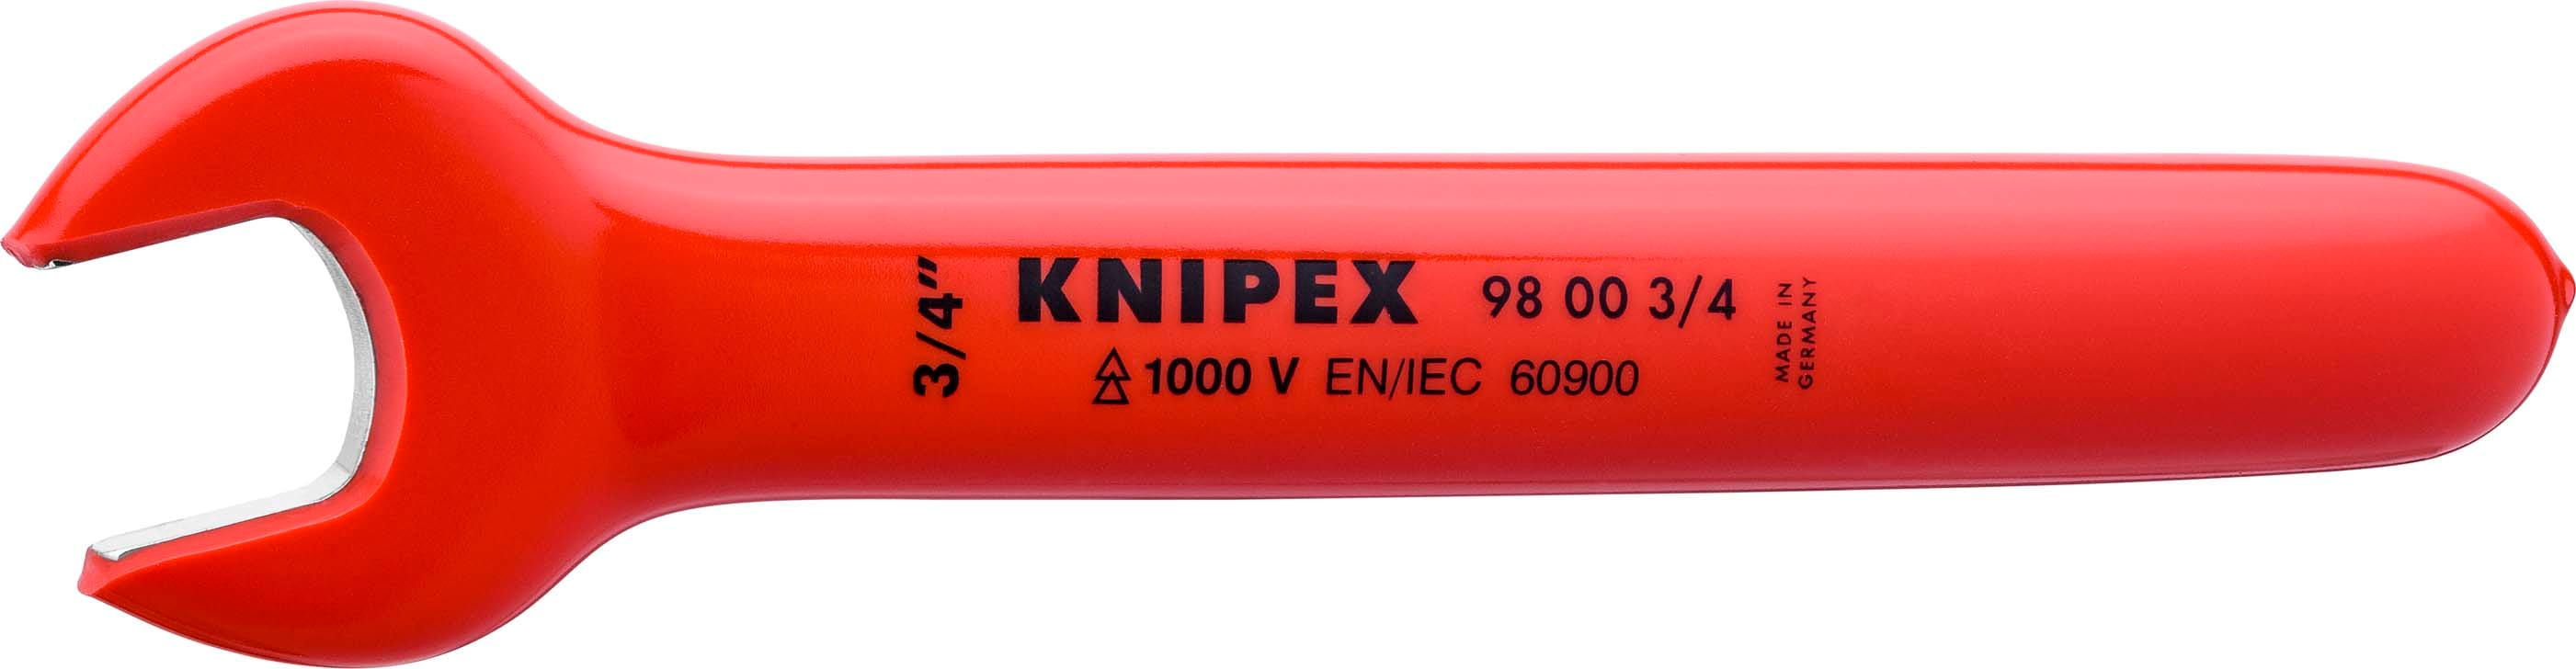 KNIPEX - Cle a fourche - 3-4'' - Tete inclinee a 15 - Longueur 190mm - Isolee 1000V